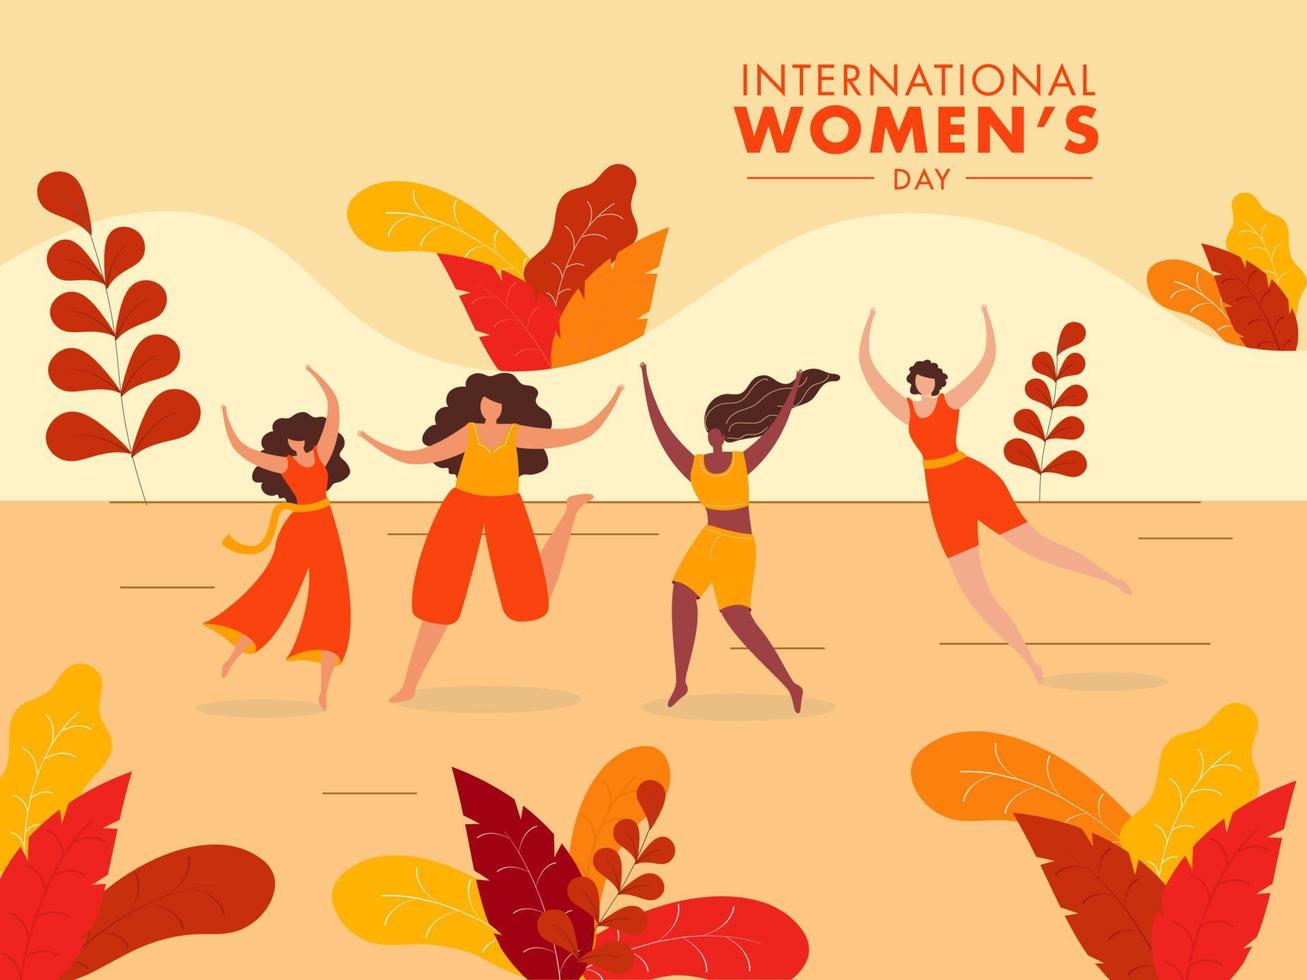 Cartoon Young Girls Dancing or Enjoying with Colorful Leaves Decorated on Orange Pastel Background for International Women's Day Celebration. vector